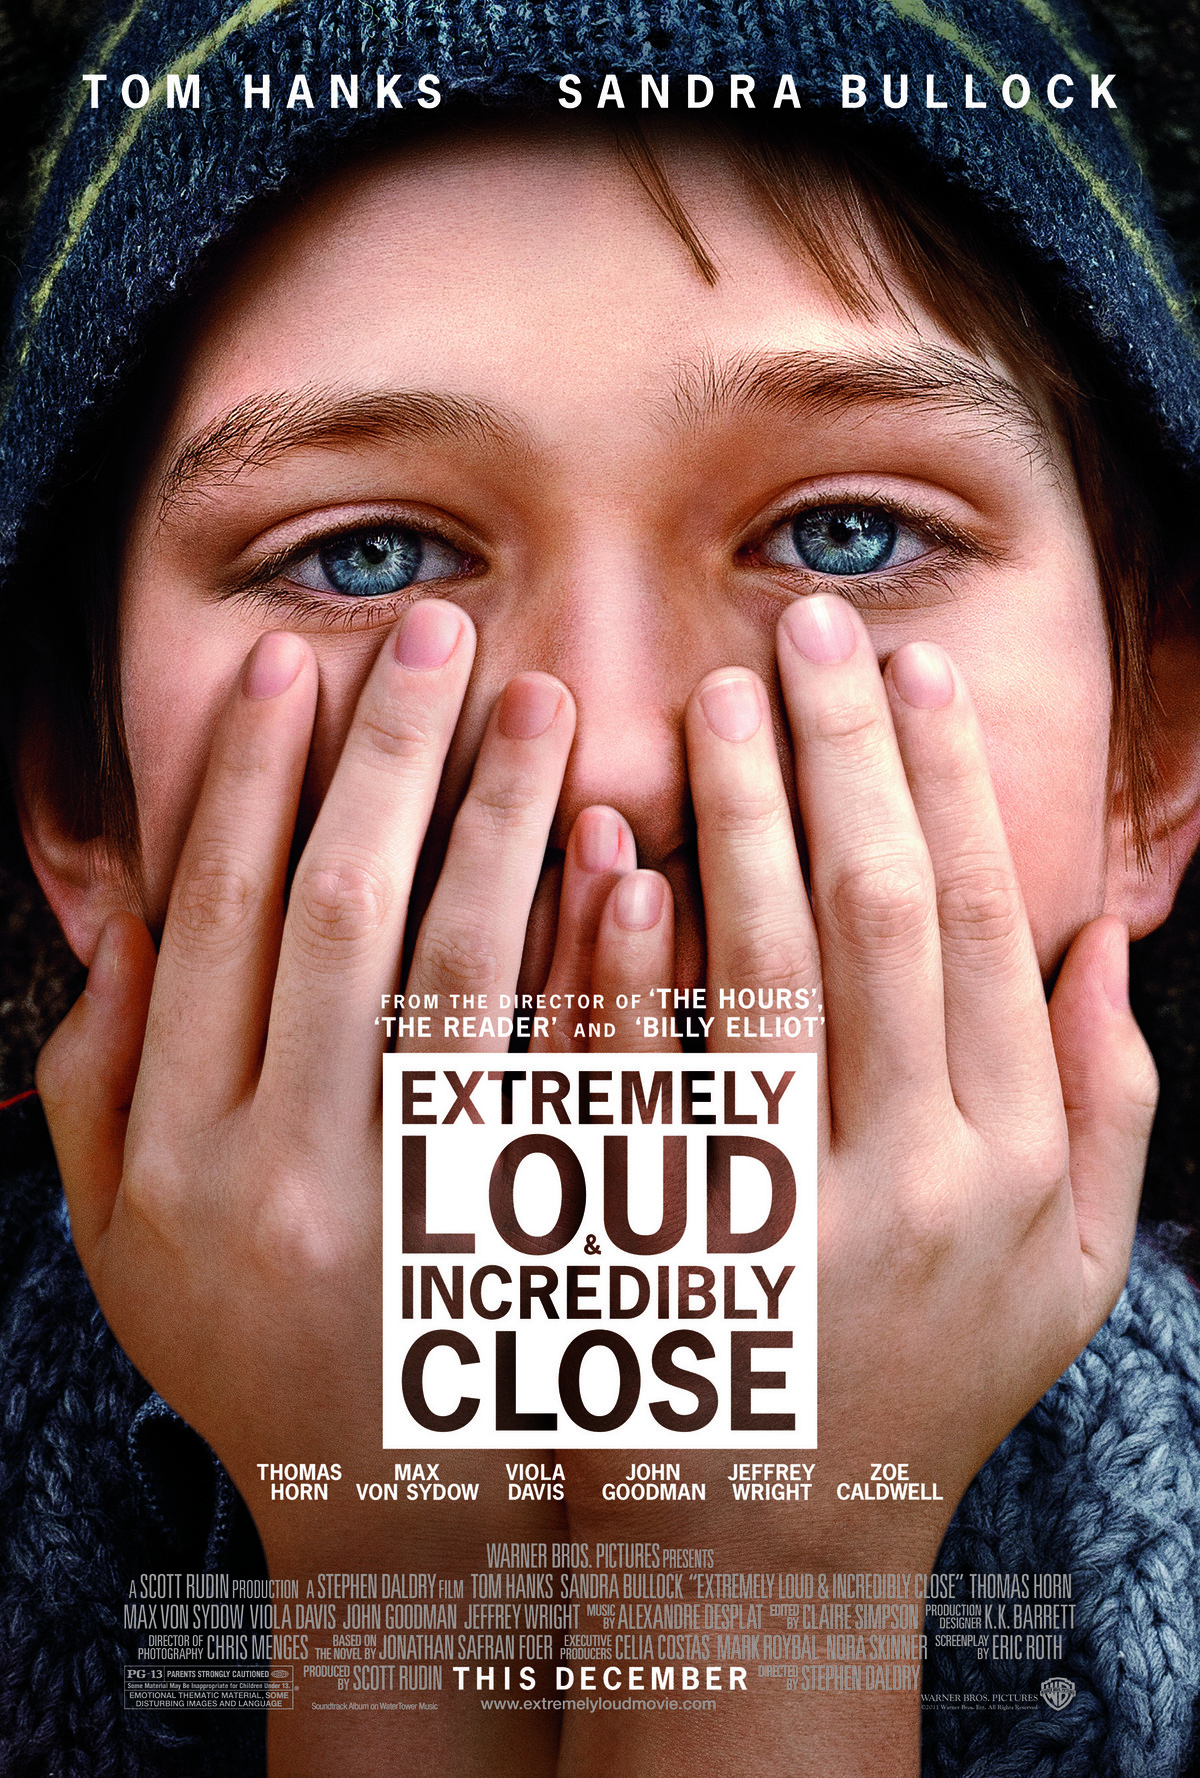 Extremely Loud & Incredibly Close - Movie Poster #1 (Original)